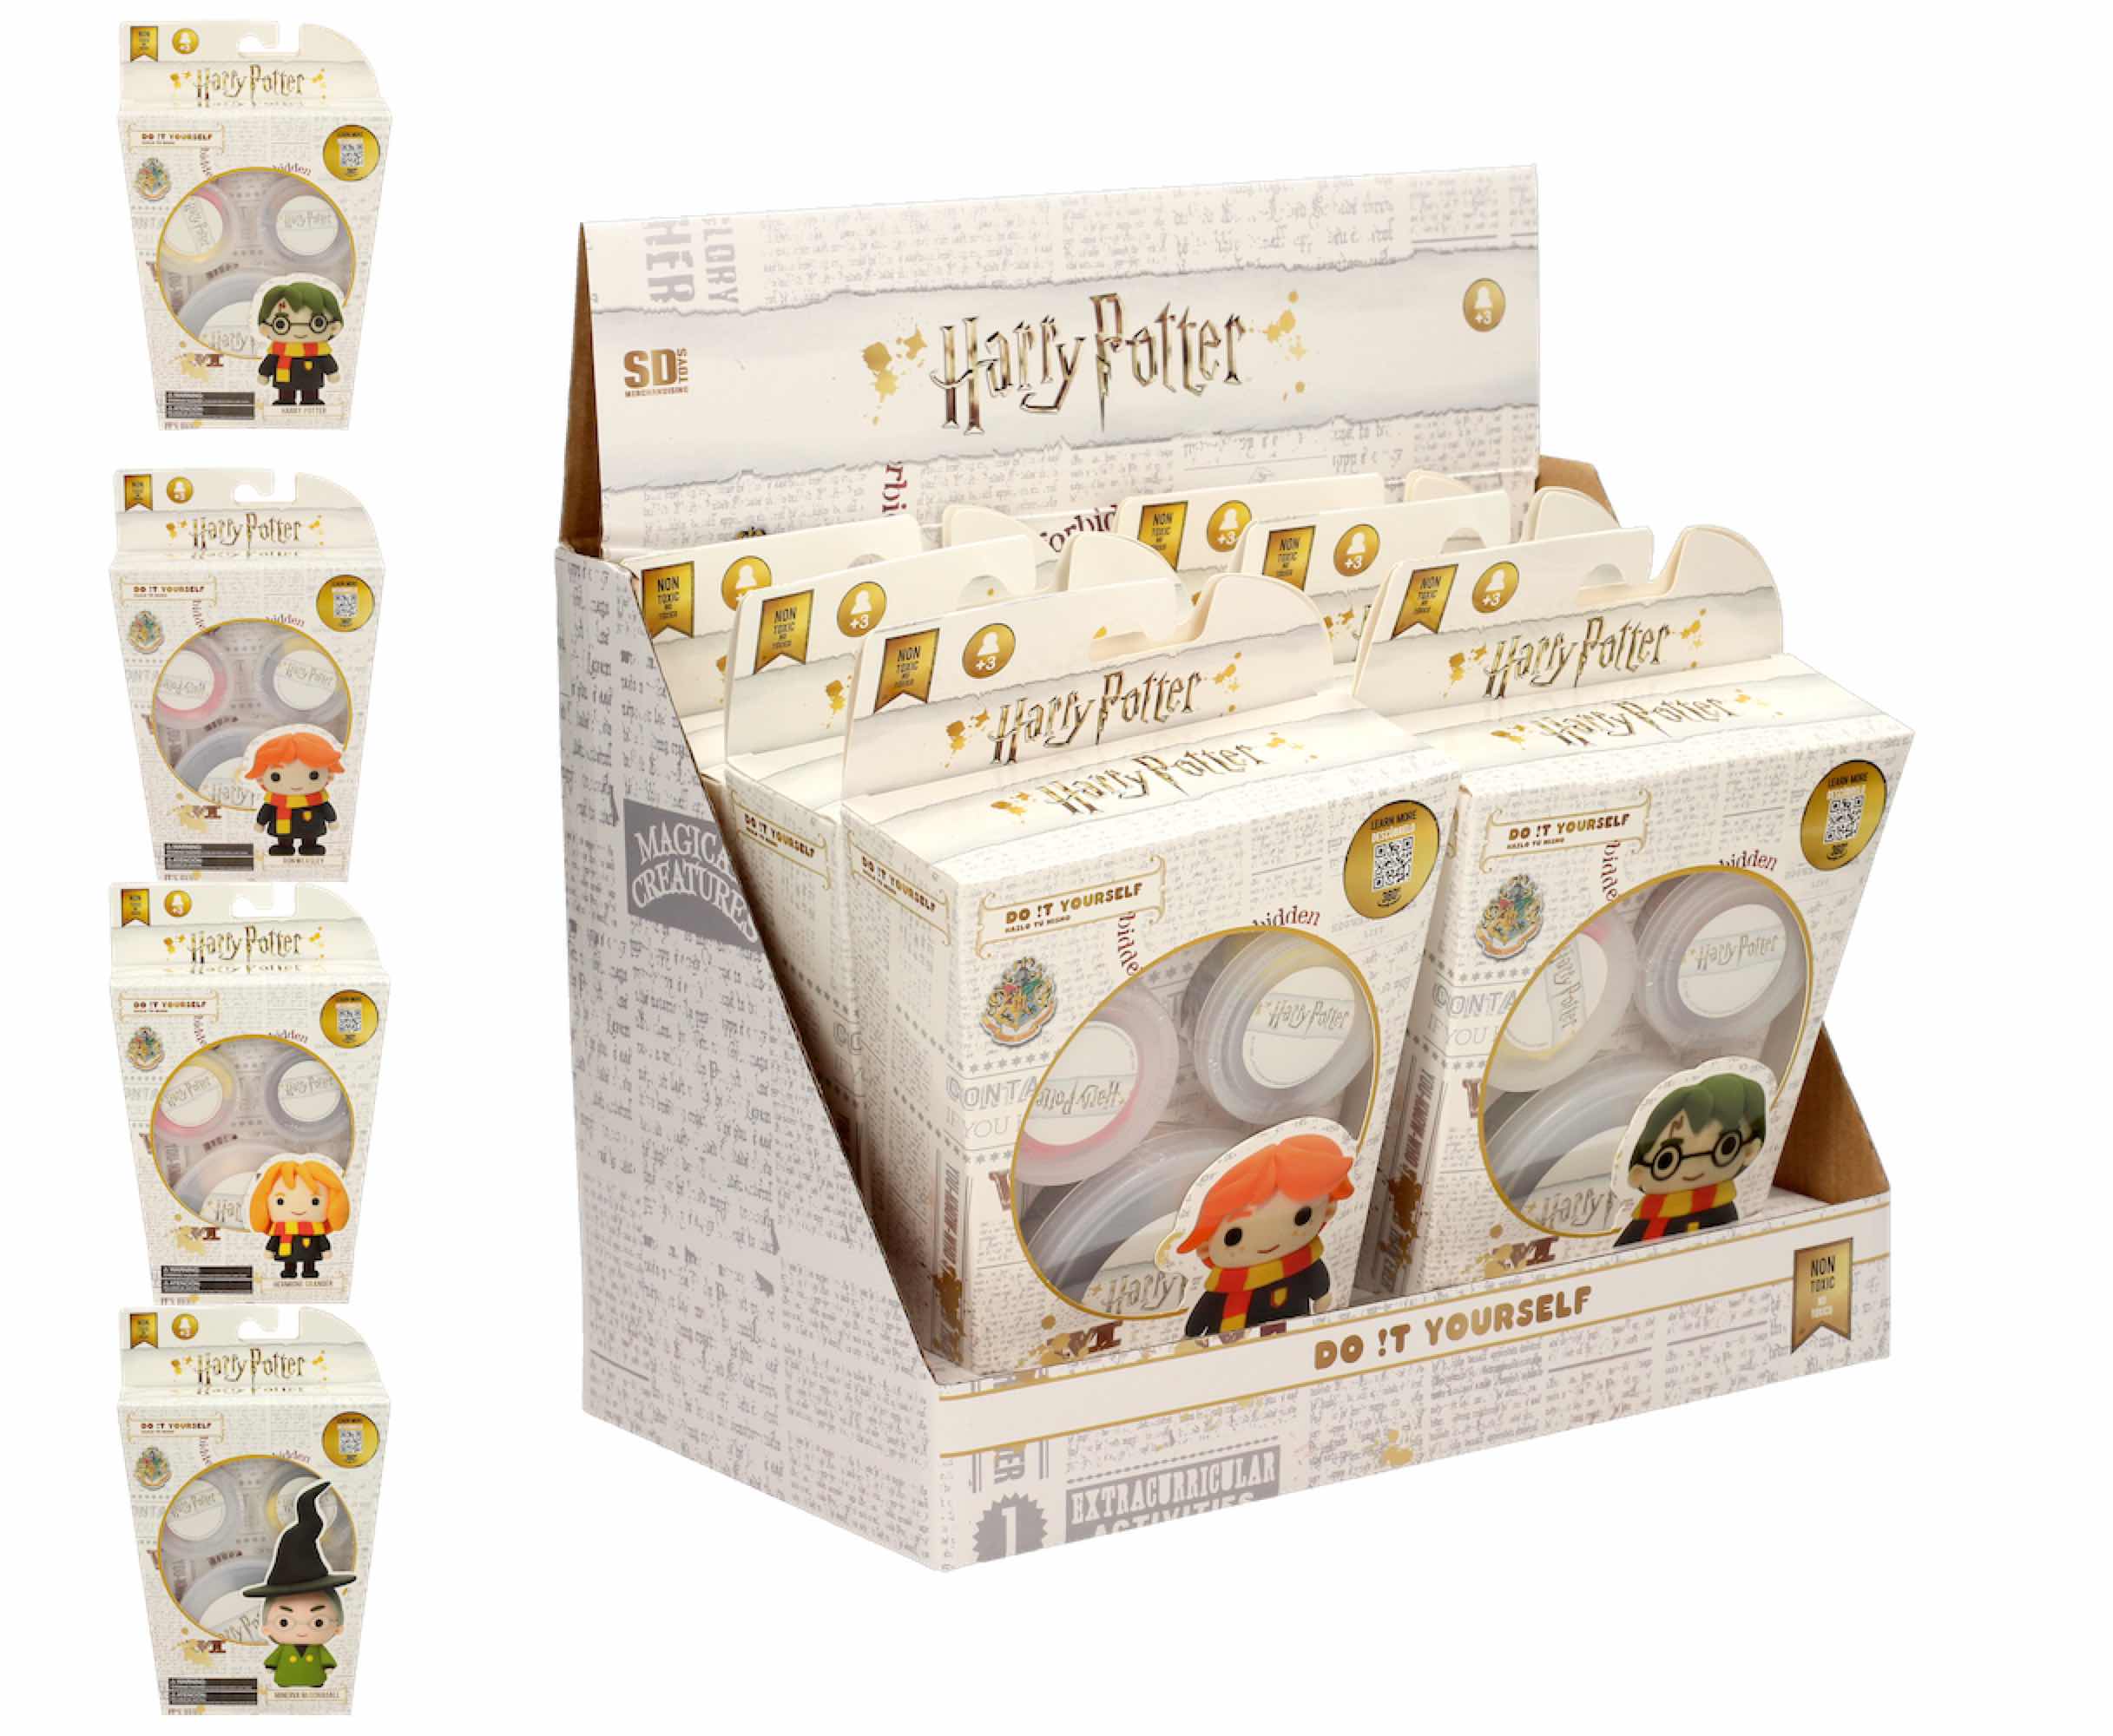 EXPOSITOR 6 UNIDADES SUPER DOUGH S1 HARRY POTTER- DO IT YOURSELF